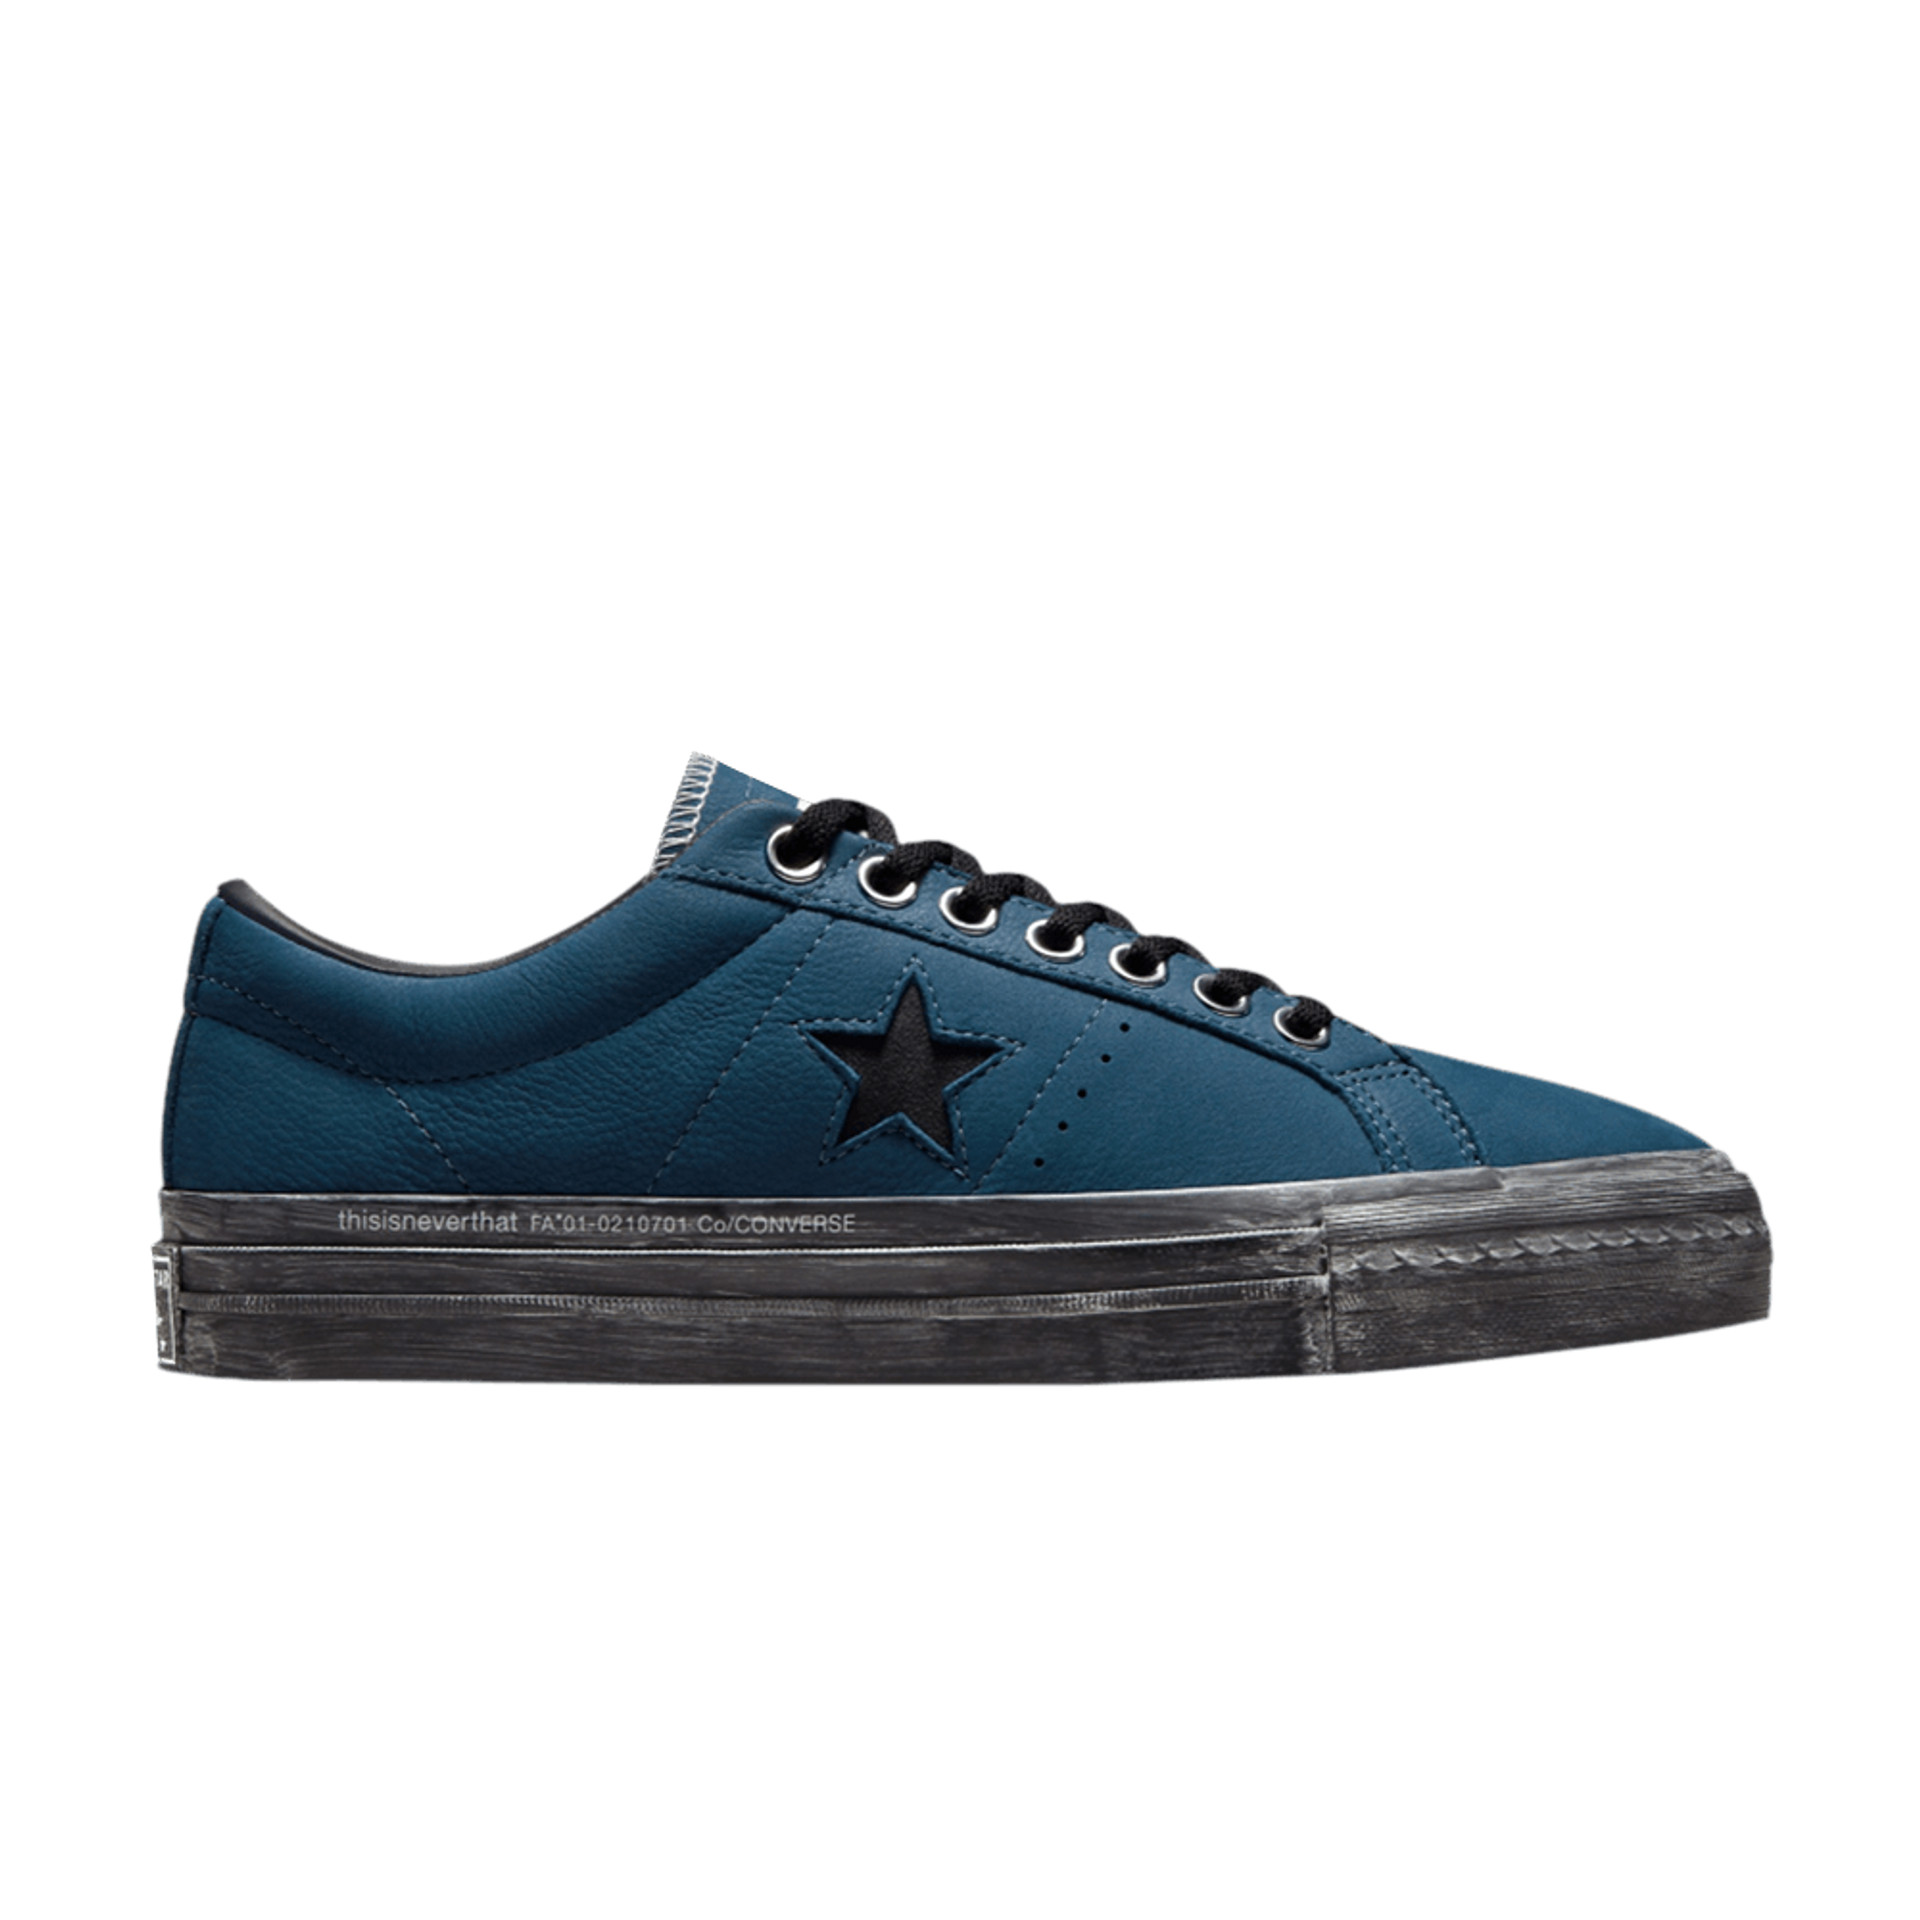 Converse thisisneverthat x One Star Low 'New Vintage' - 172394C | Ox Street